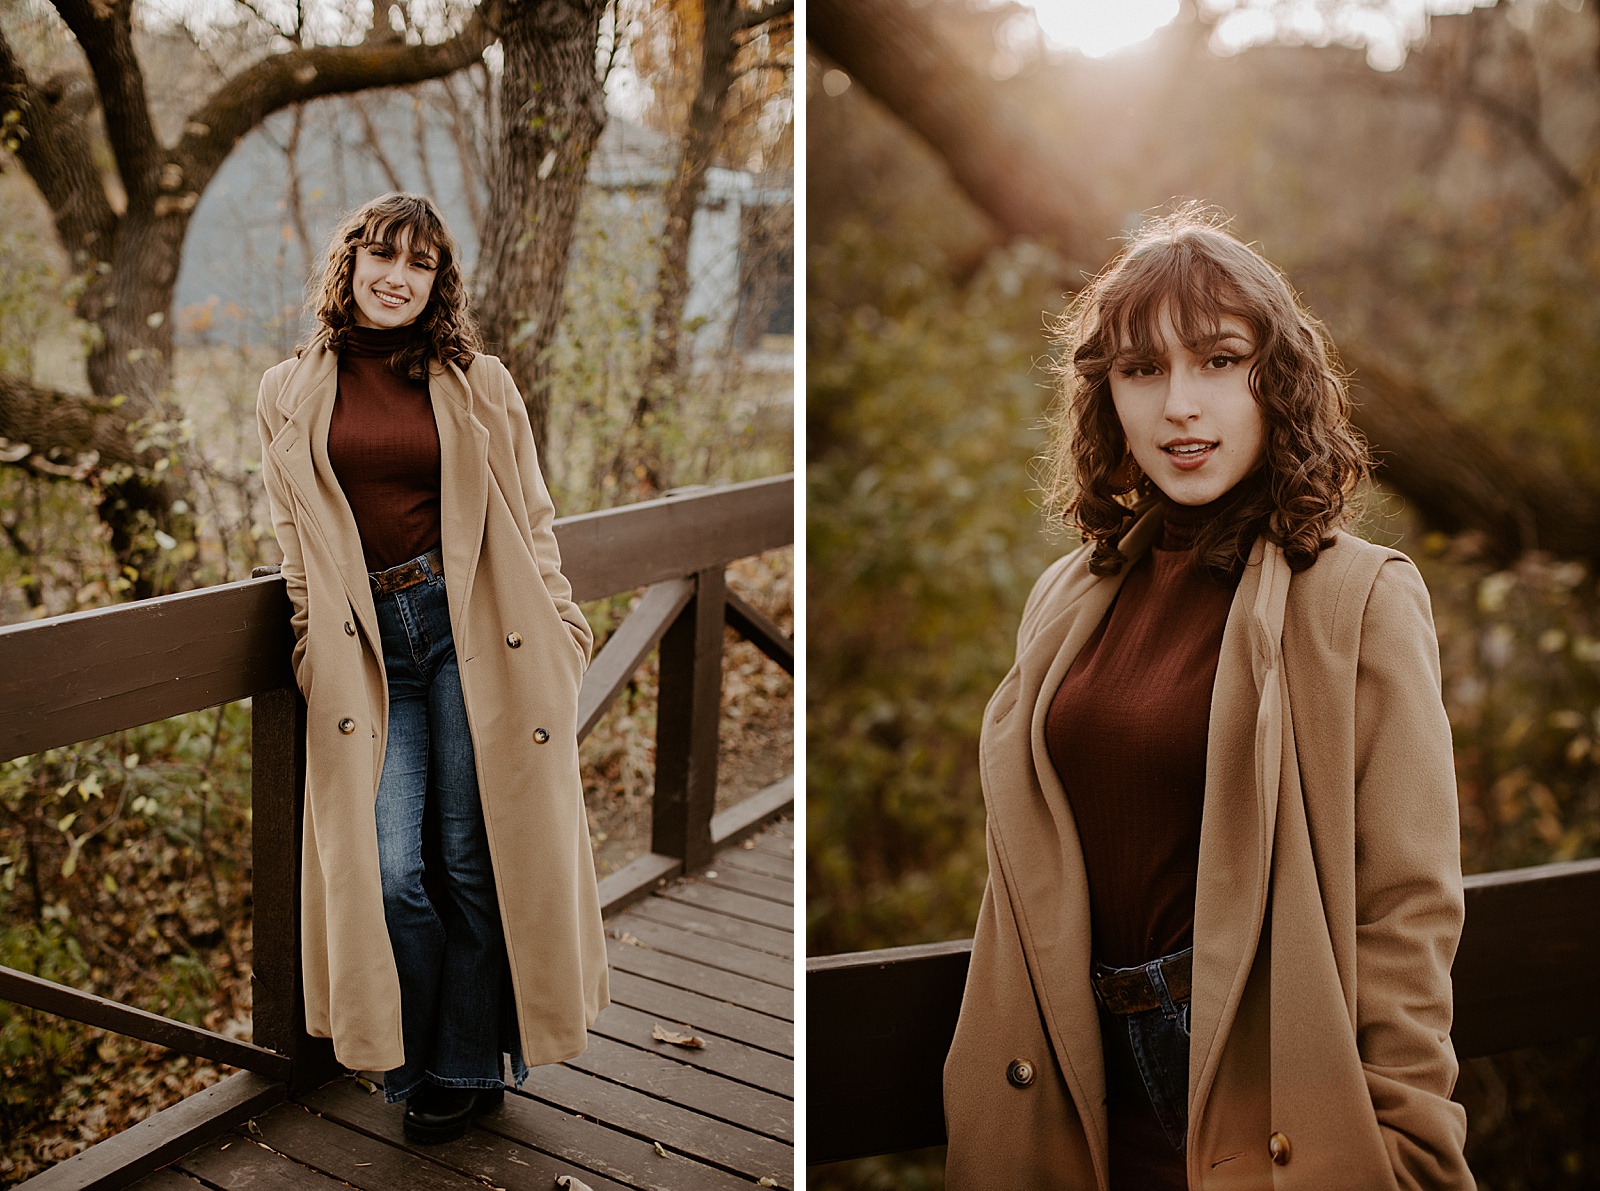 Mickee's downtown Bismarck senior pictures, and golden hour at Sleepy Hollow Theatre & Arts Park were the perfect end to my senior season!